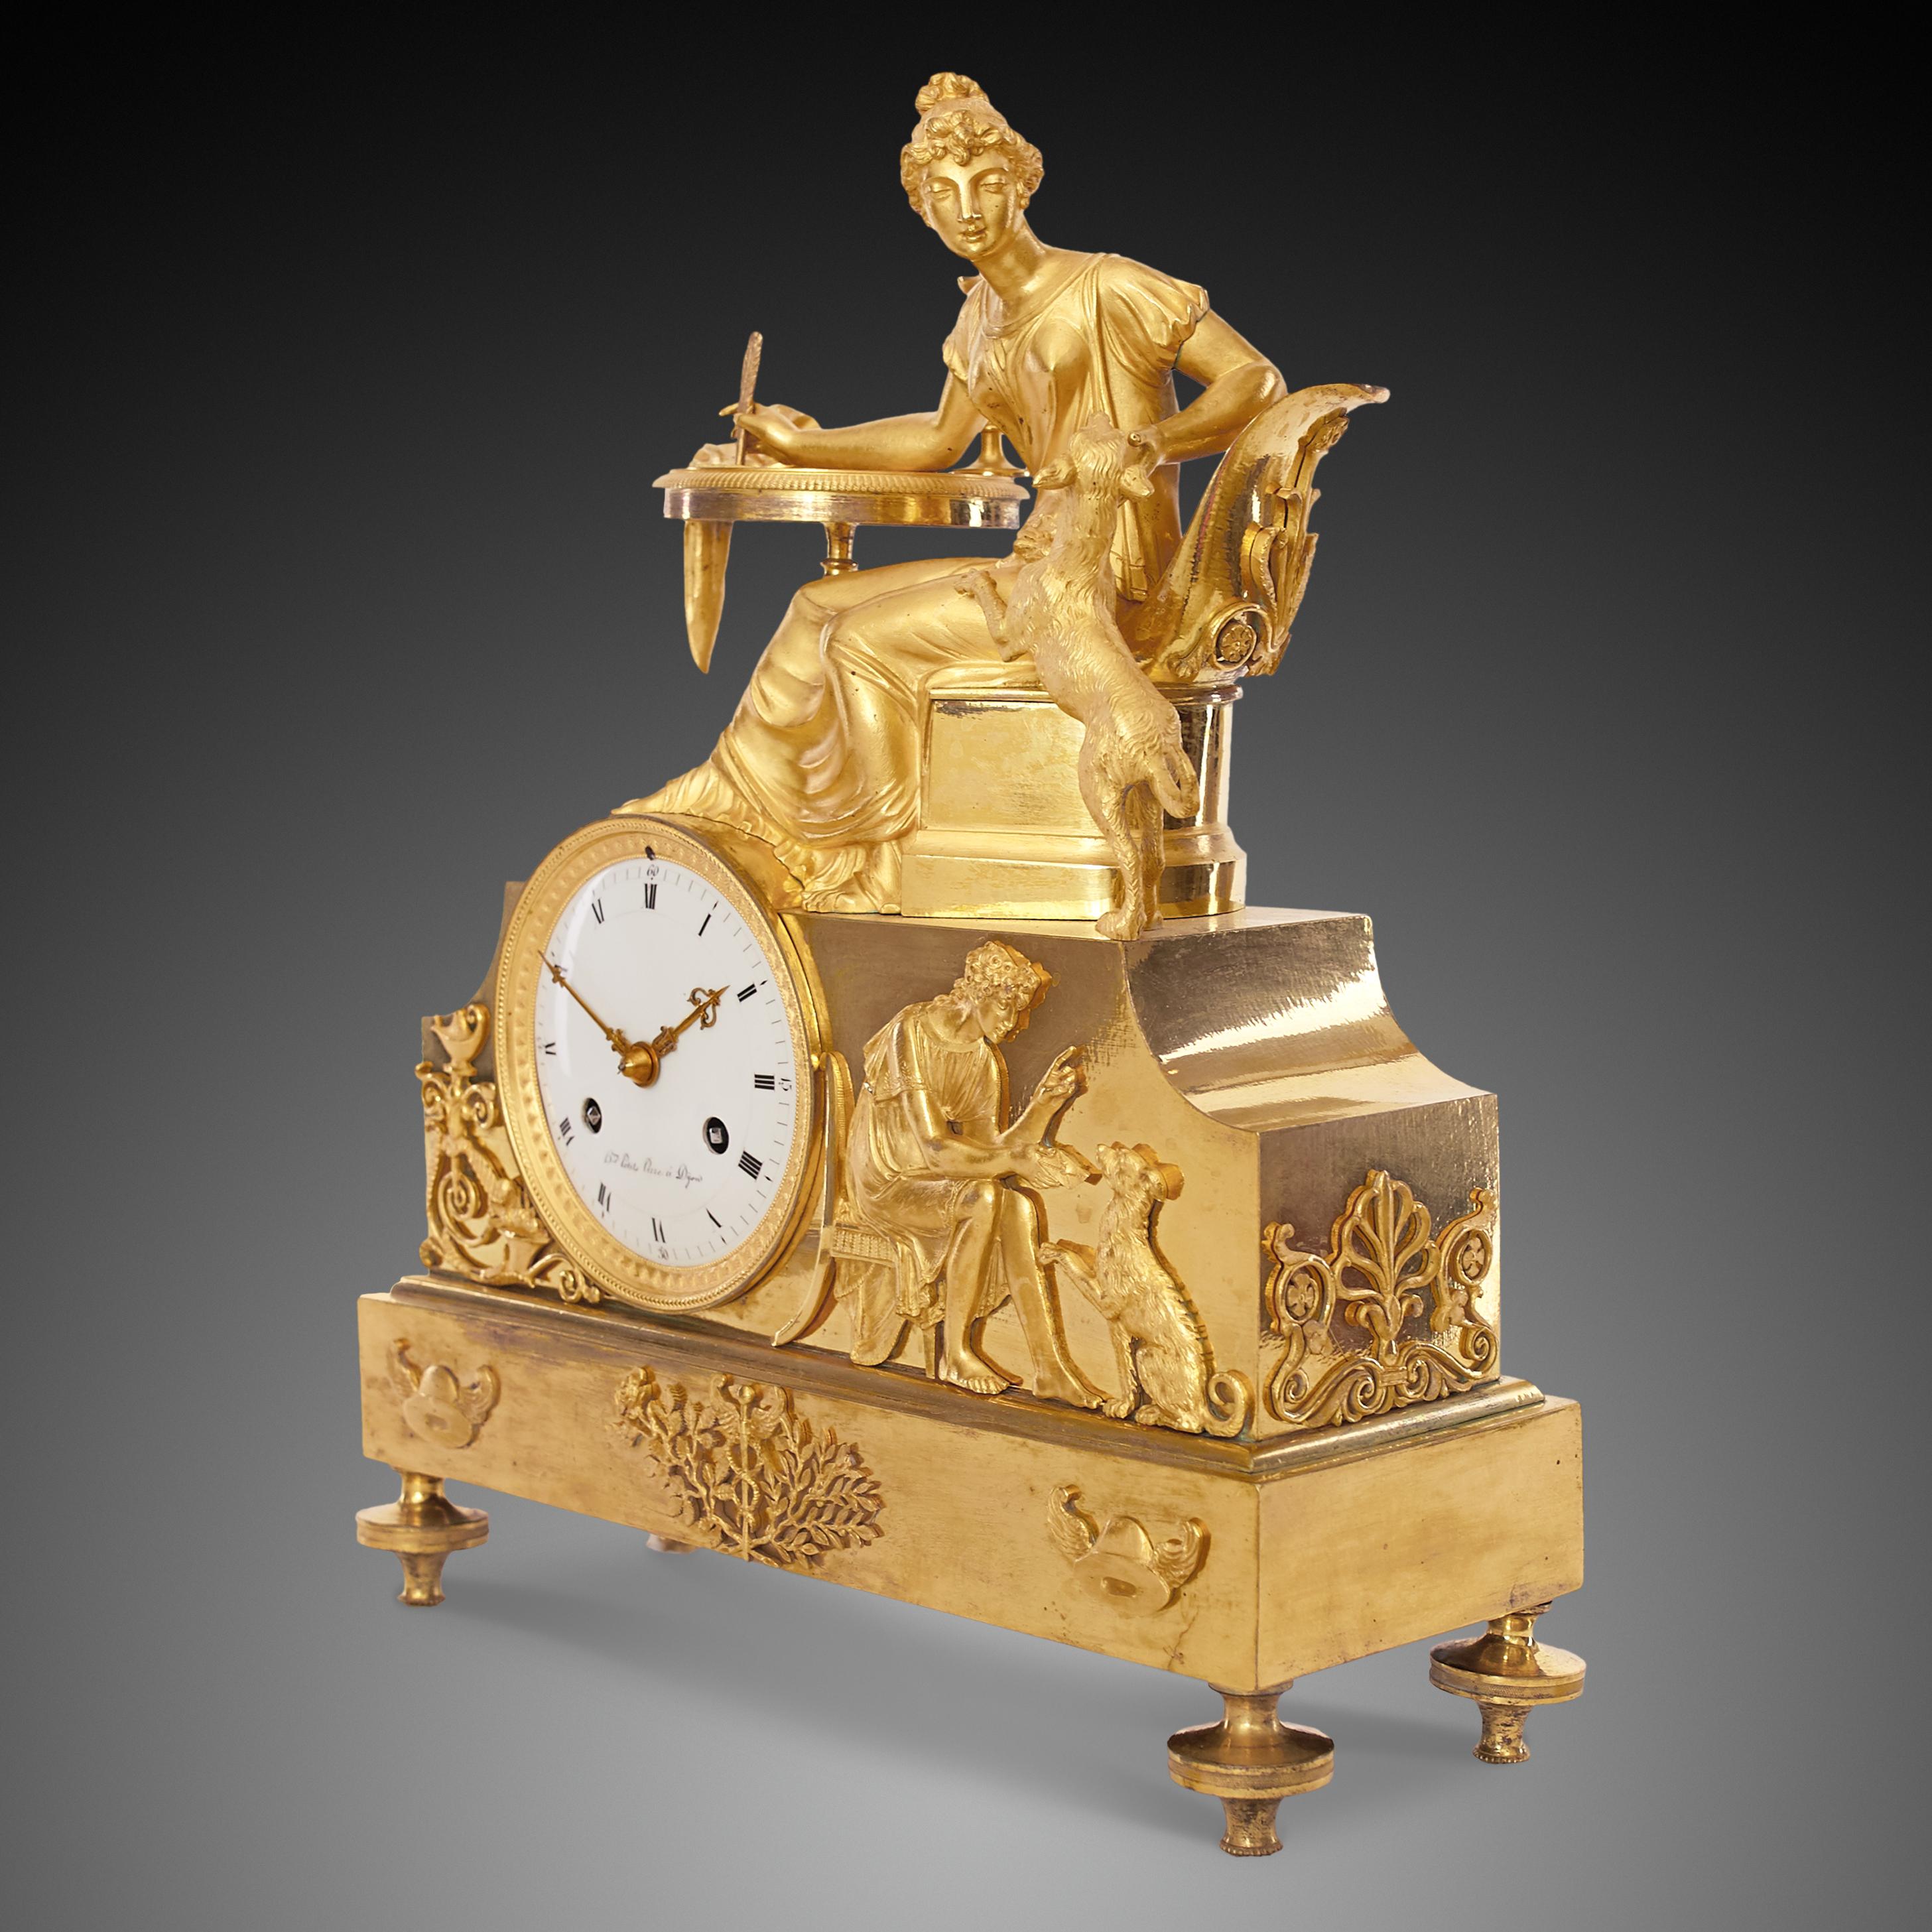 Early 19th century Empire clock crafted of gilt bronze, or ormolu, featuring an allegorical scene with a woman sitting at her work table playing with her dog, symbol of loyalty. The group is set above a raised case containing the dial. On one side